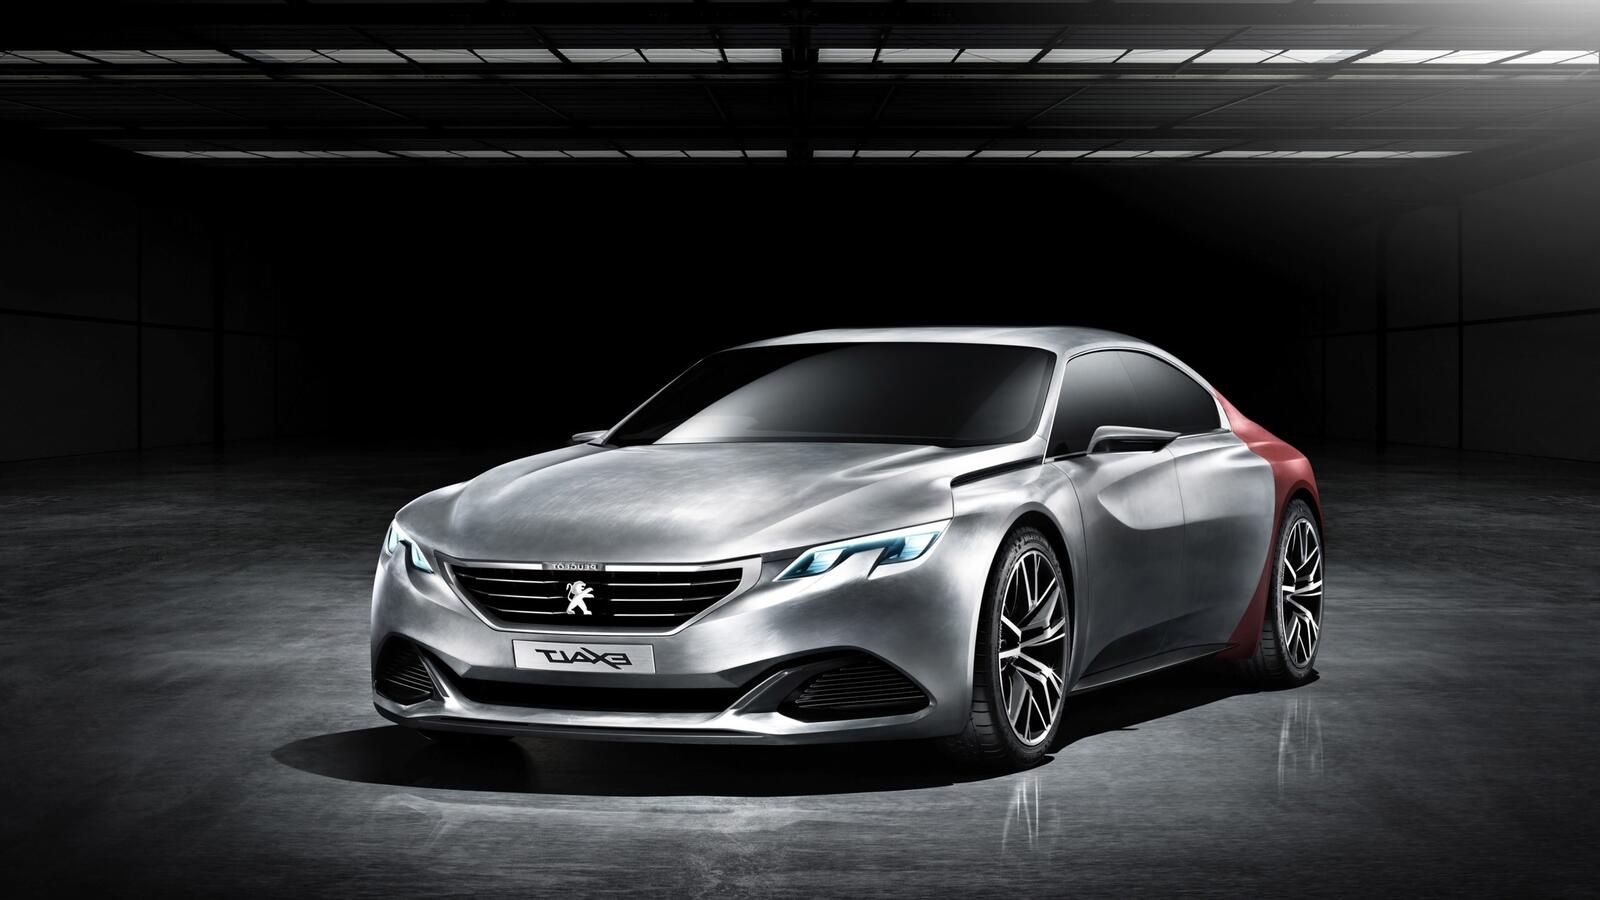 Wallpapers Peugeot coupe silvery on the desktop